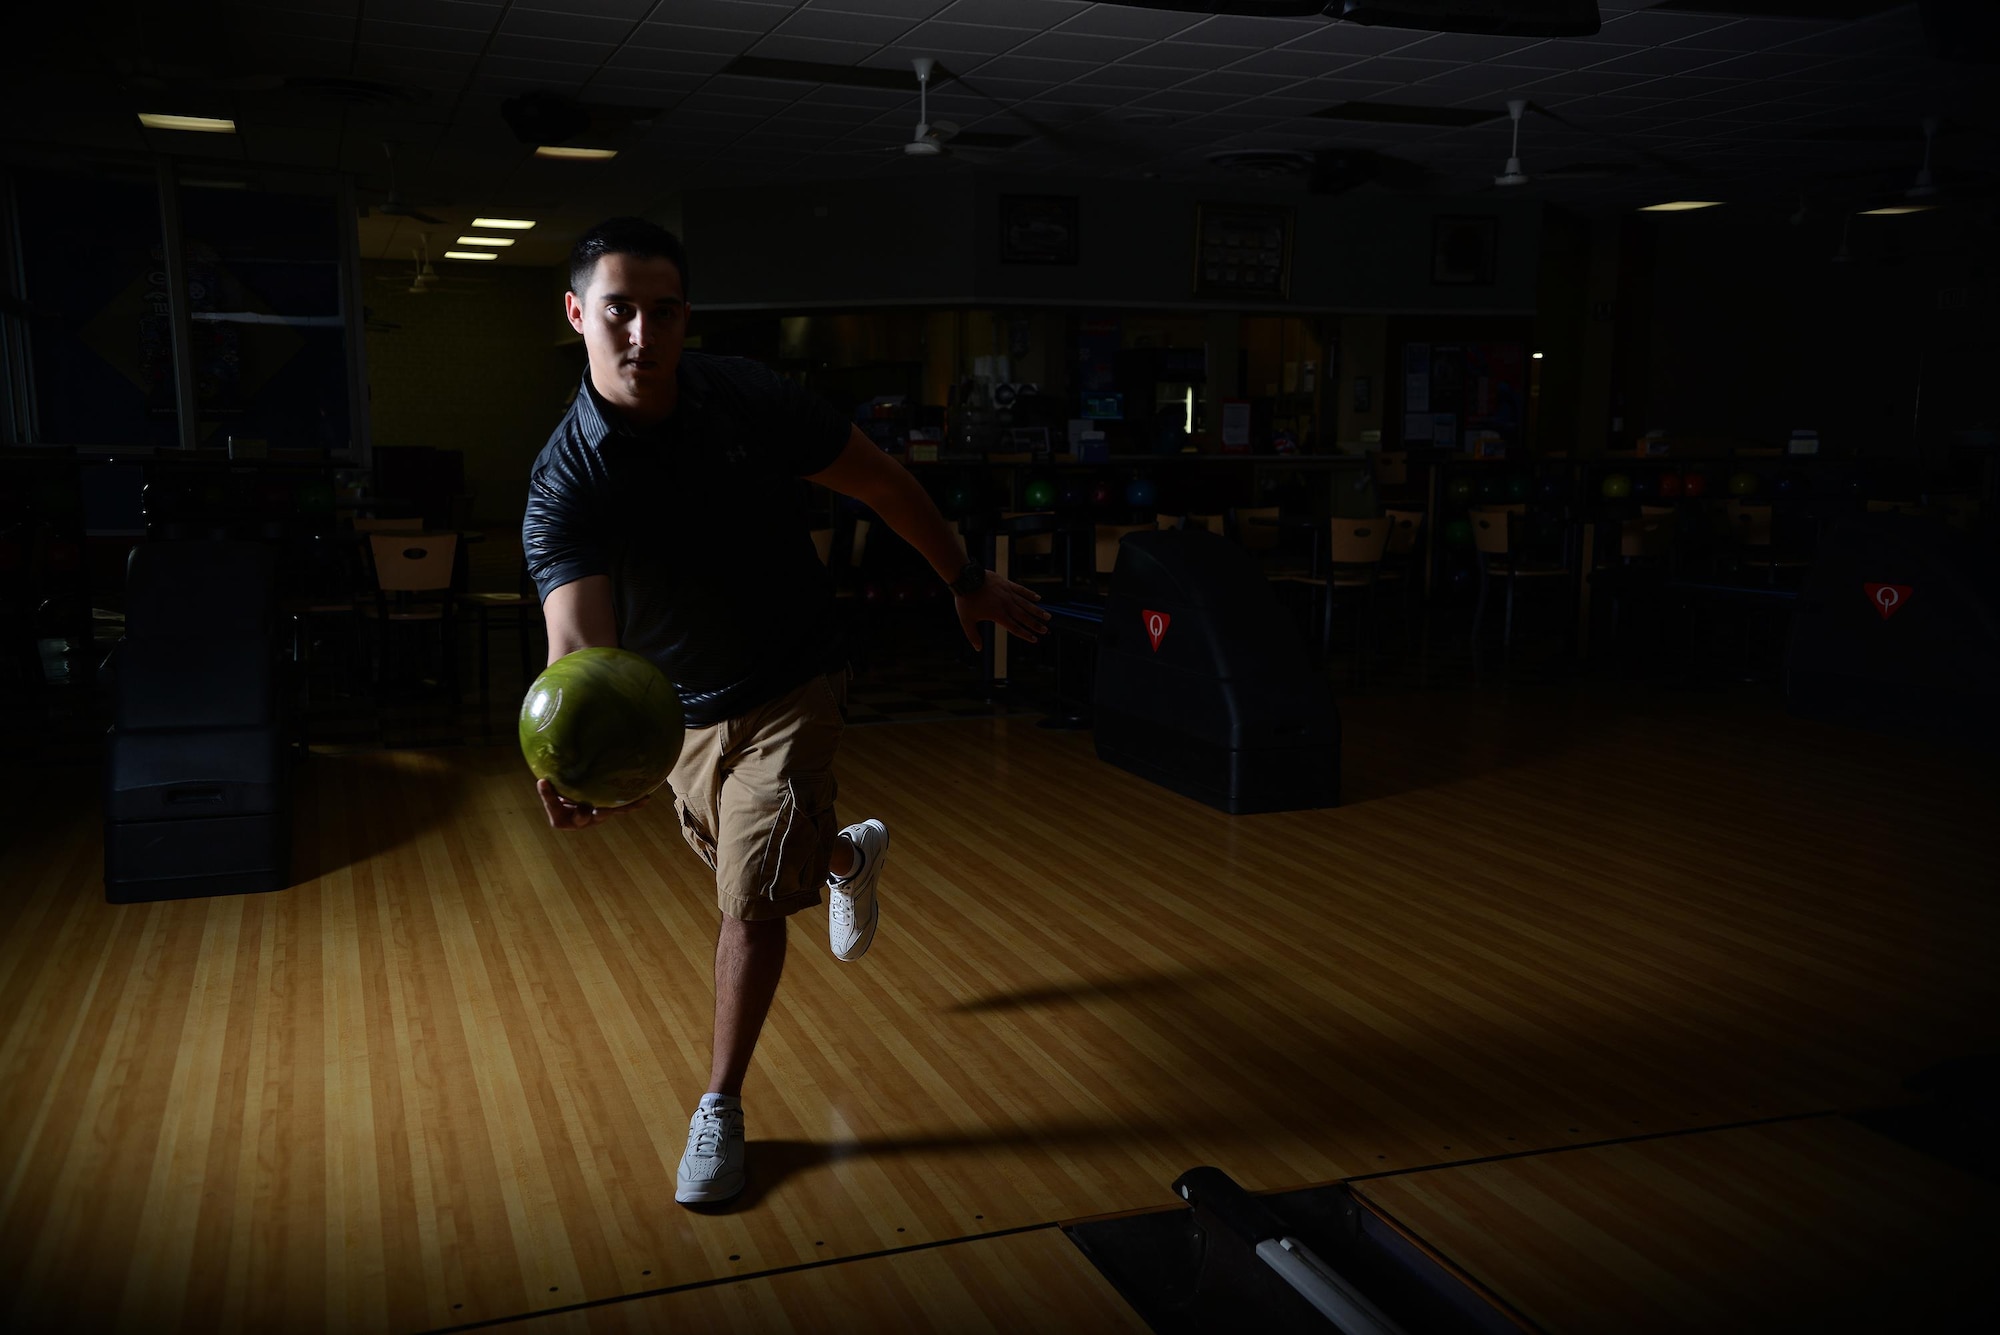 Senior Airman Javier Perez, 47th Medical Support Squadron diagnostic imaging technologist, poses at Cactus Lanes Bowling Center on Laughlin Air Force Base, Texas, Oct. 16, 2015. When not in uniform, the second place winner of the 2015 USBC Texas State tournament, singles division, is practicing his passion at the bowling center, preparing for his next bowling tournament. (U.S. Air Force photo by Airman 1st Class Ariel D. Partlow) (Released)